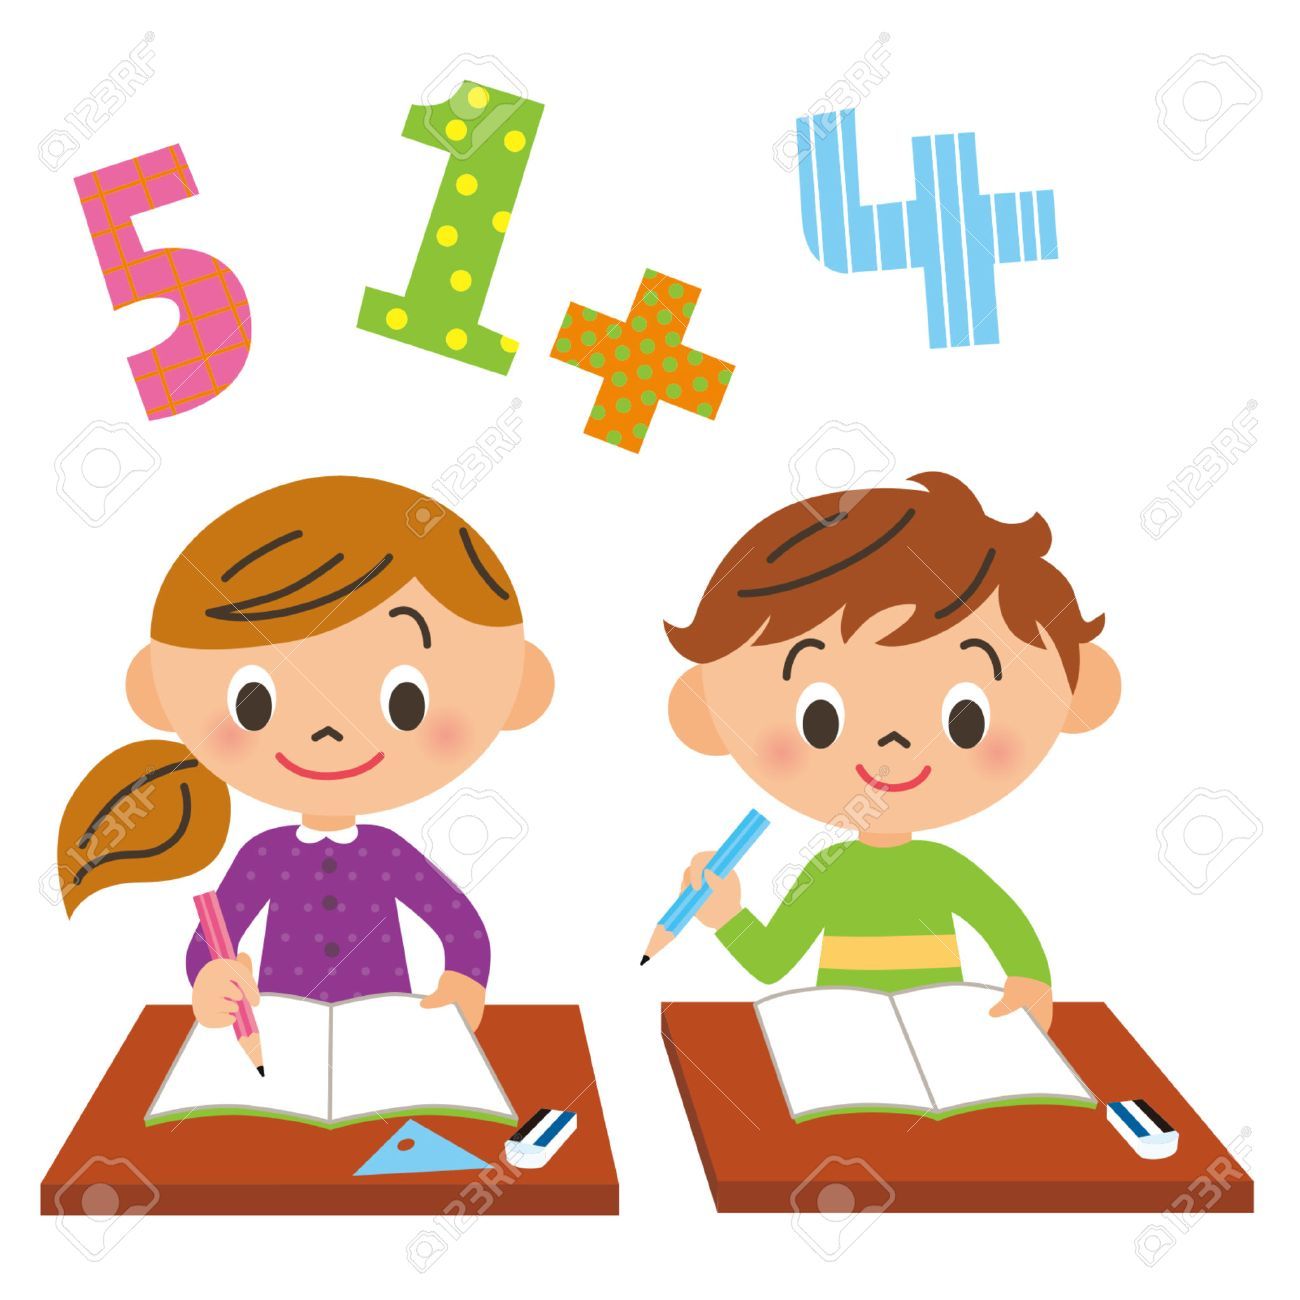 Child studying at school clipart » Clipart Portal.